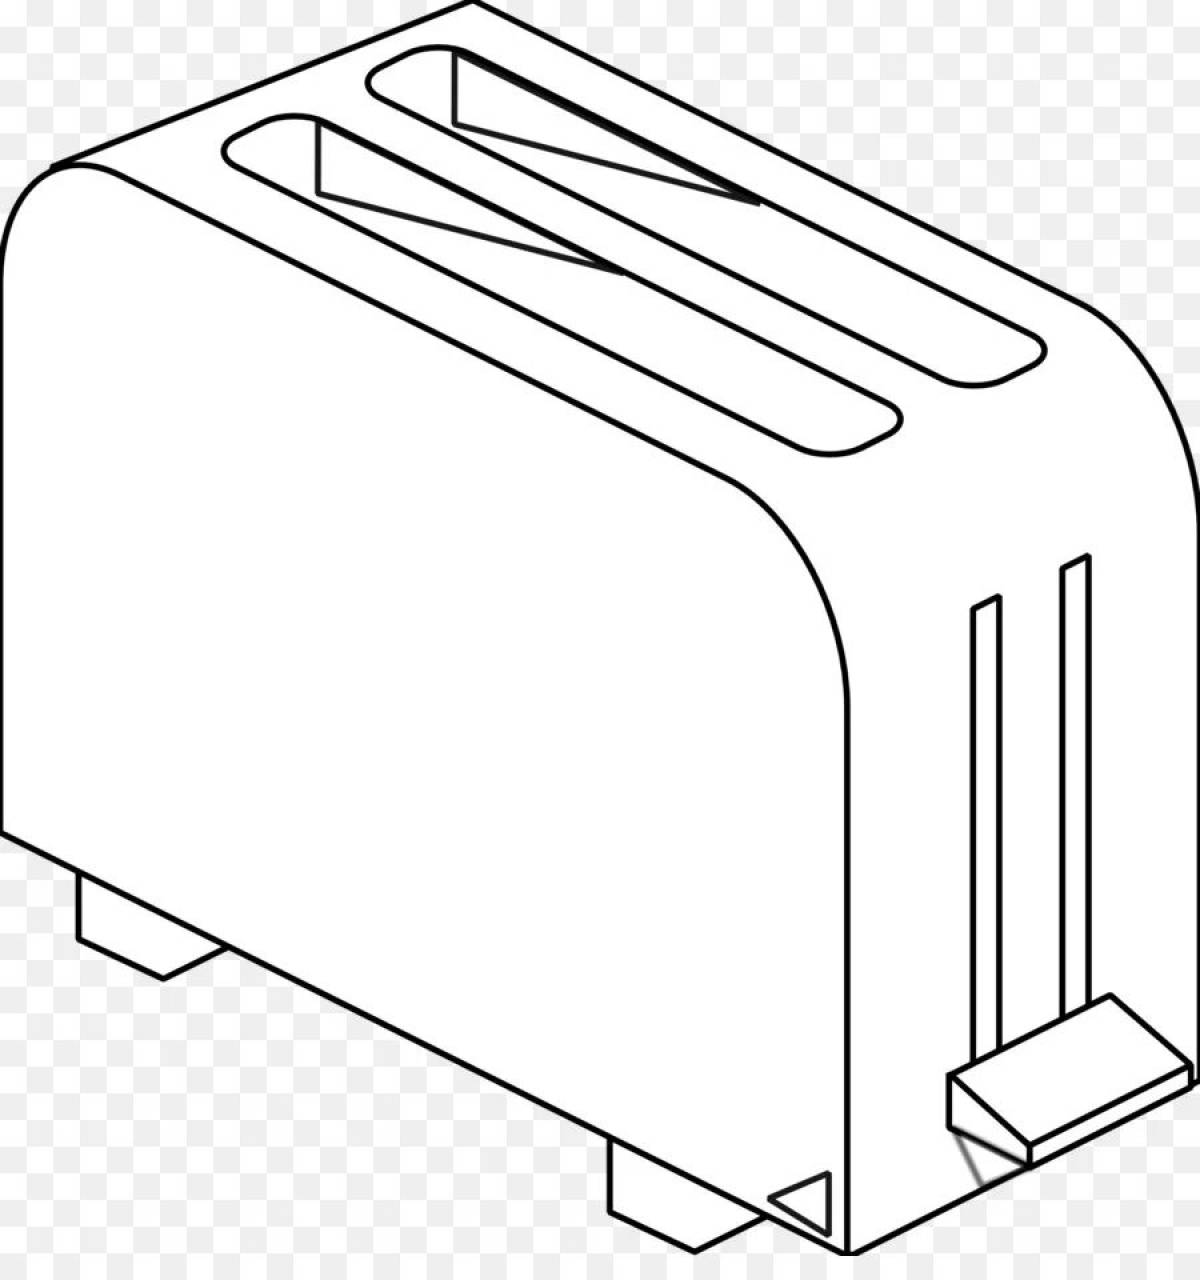 Cute toaster coloring page